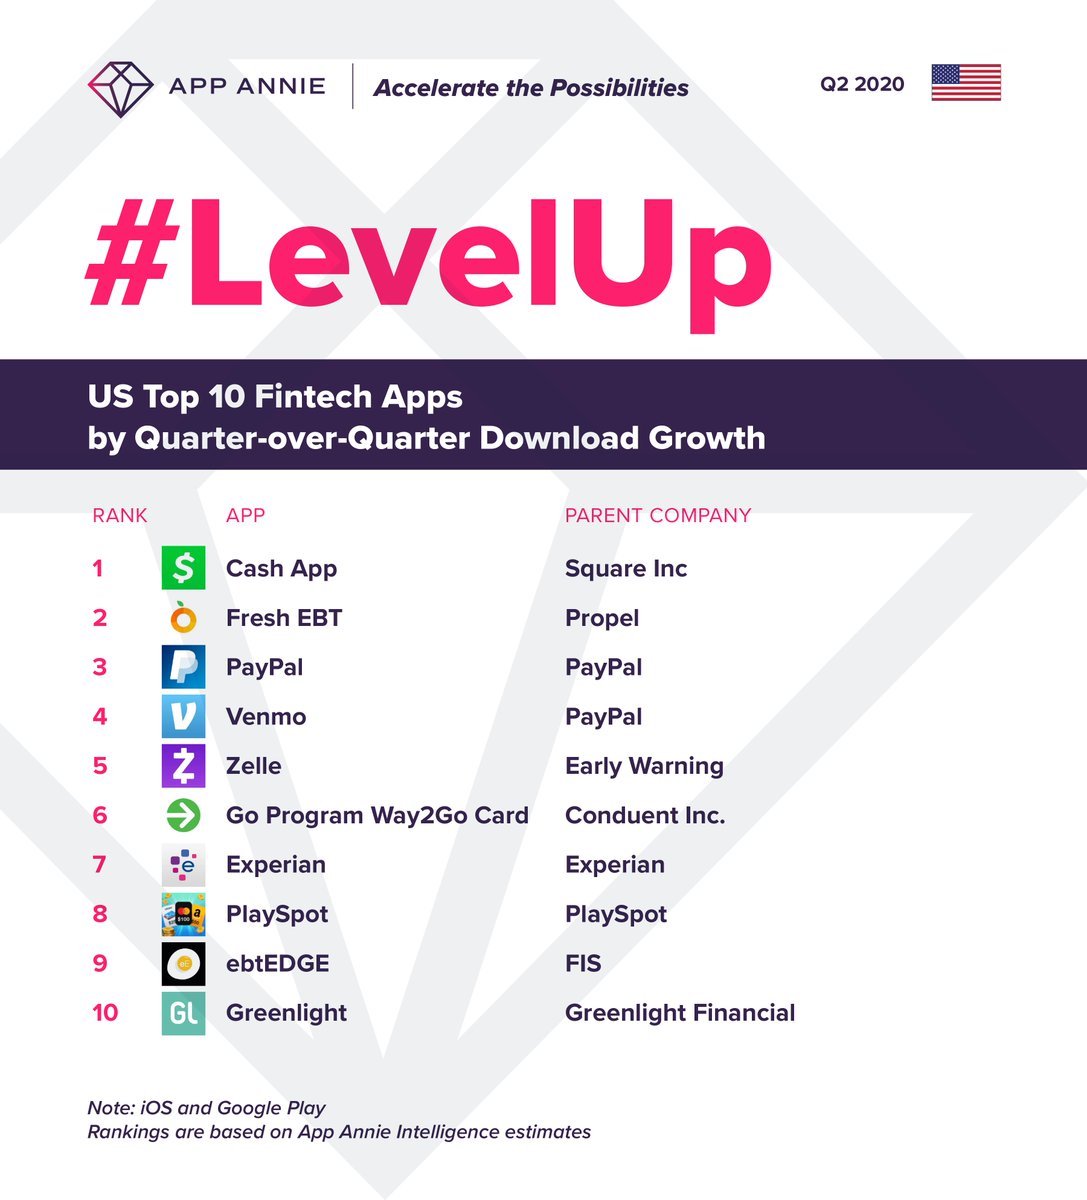 App Annie On Twitter In Q2 Cashapp Freshebt Paypal Venmo And Zelle Grew The Most In Downloads Among Fintech Apps In The Us For More On The Power Of Mobile Https T Co Vhv9pwv3hp Https T Co Sakyp5xytp